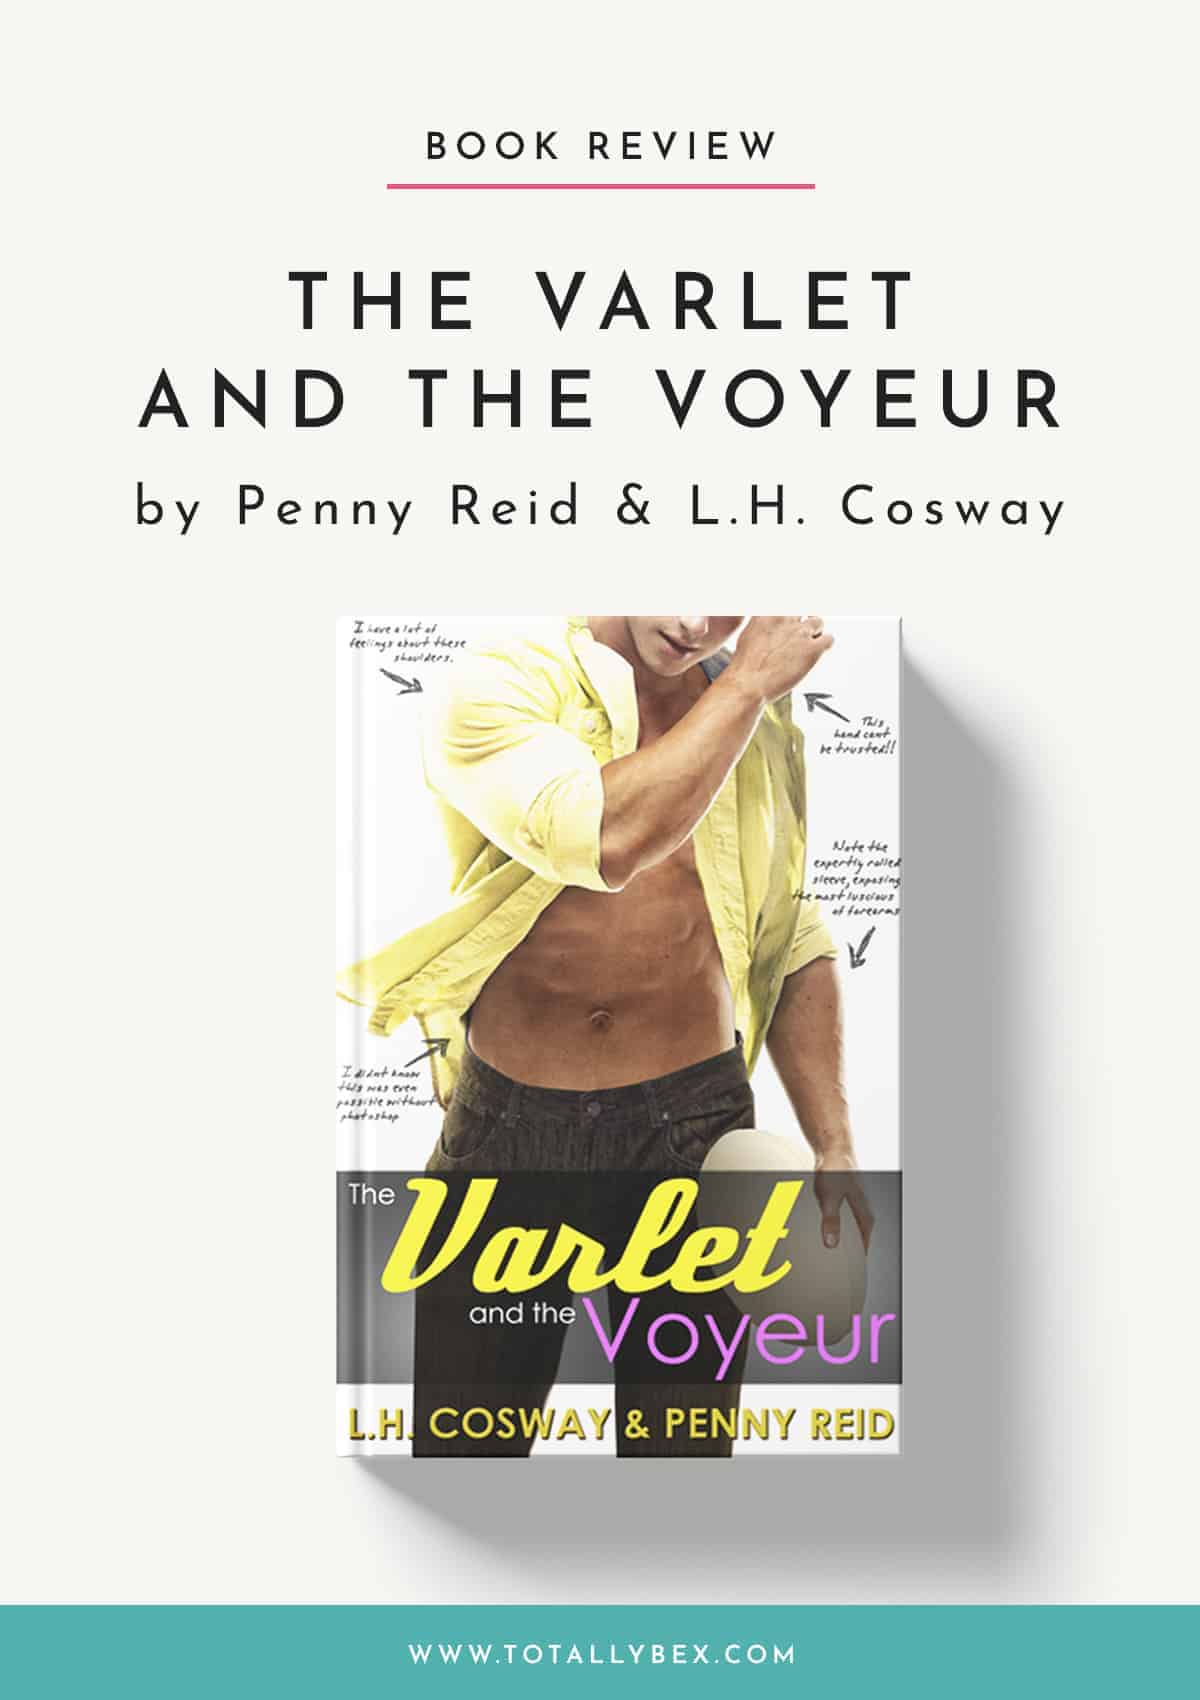 The Varlet and the Voyeur by Penny Reid and LH Cosway – Book 4